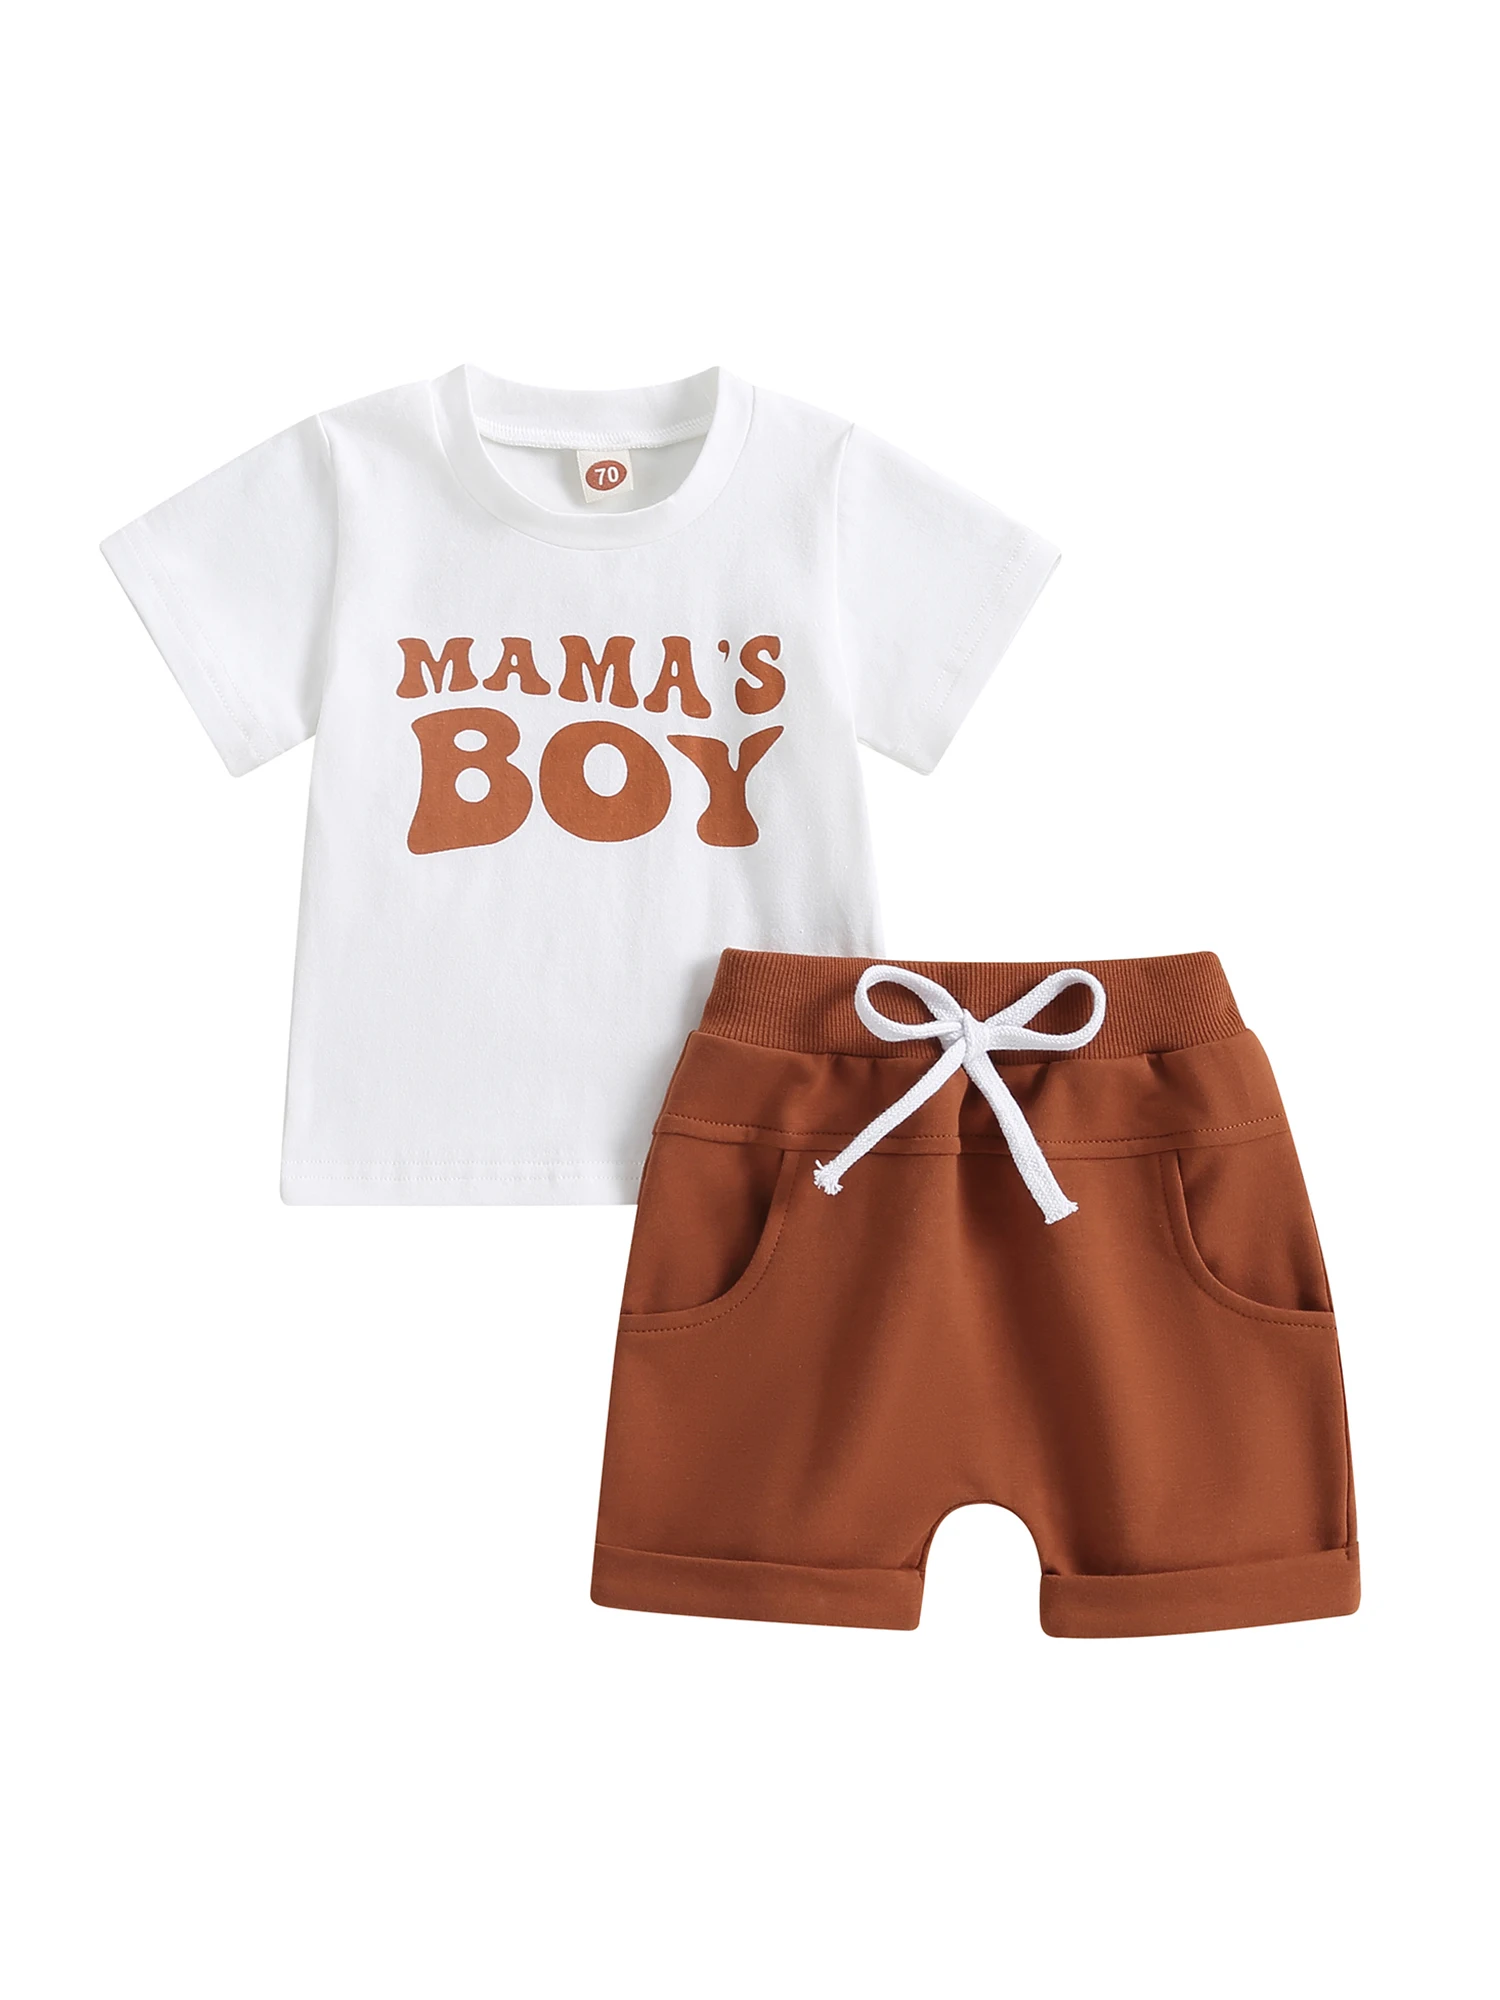 Newborn Baby Boy Summer Clothes Short Sleeve Letter Print T Shirt Tops Elastic Infant Shorts Cute Toddler Outfit